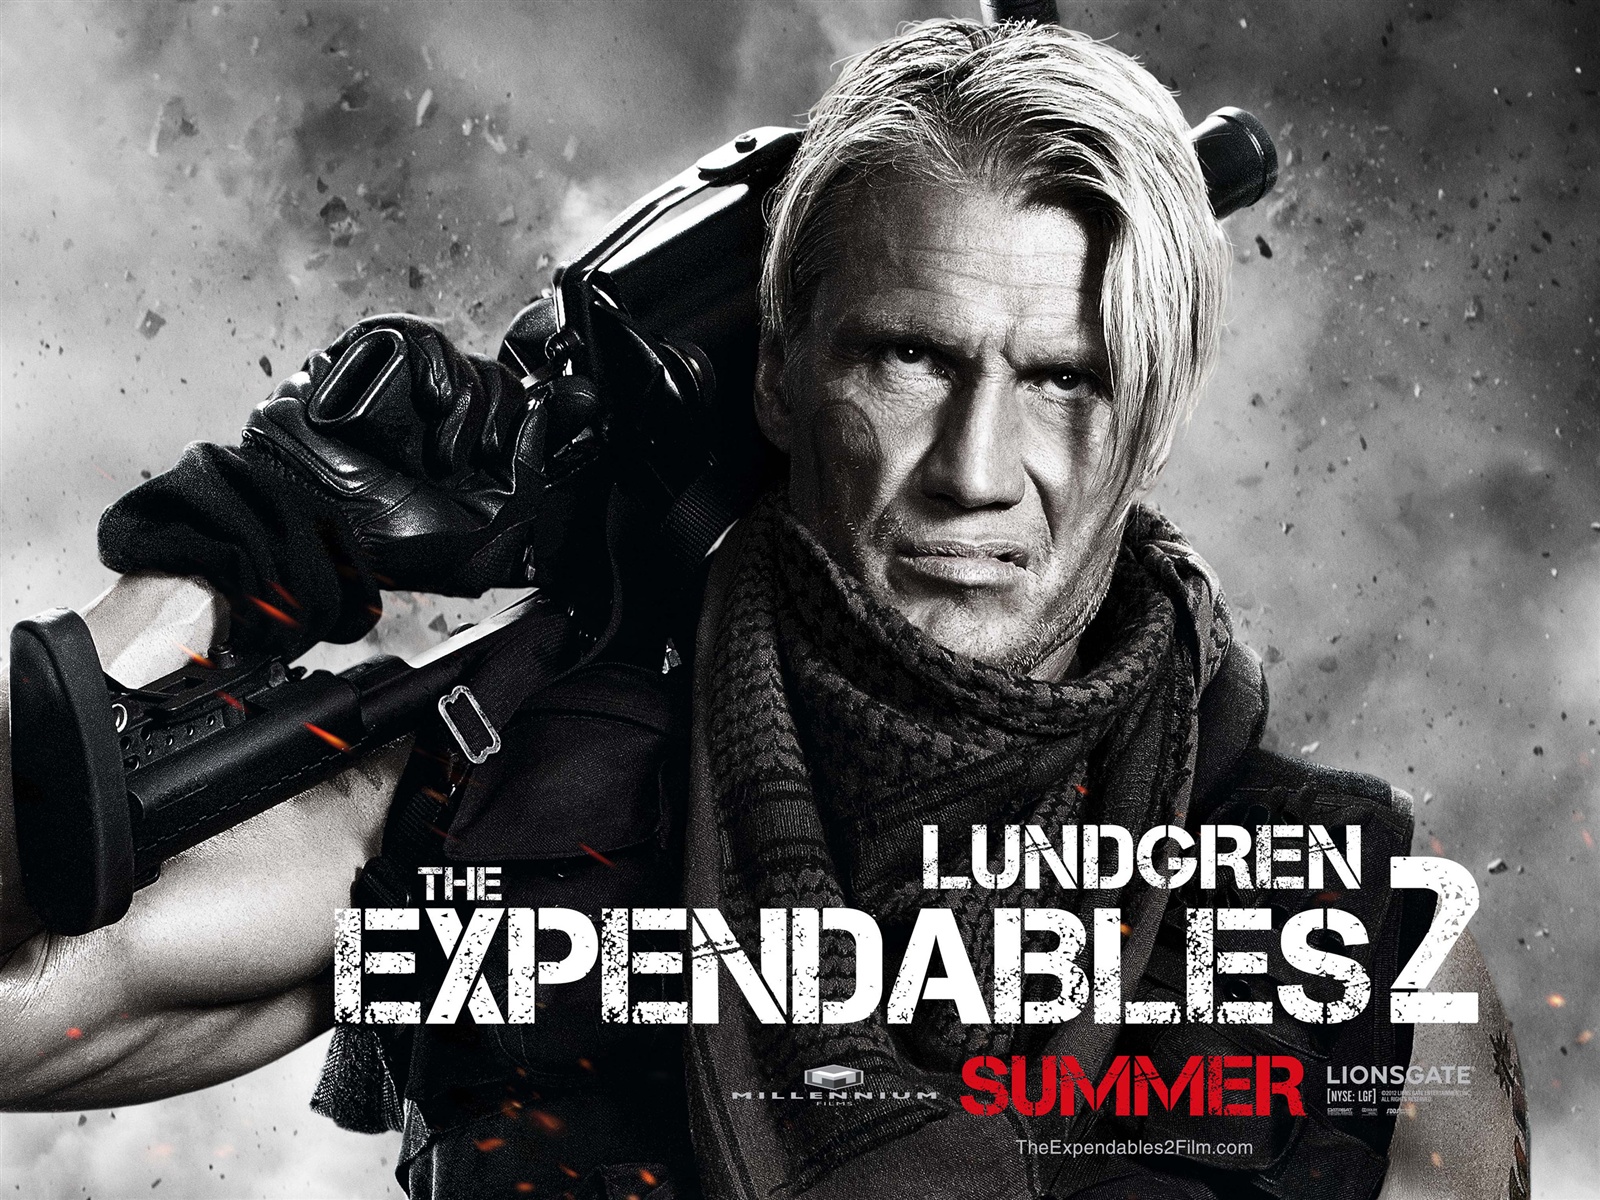 Dolph-Lundgren-in-The-Expendables-2_1600x1200.jpg